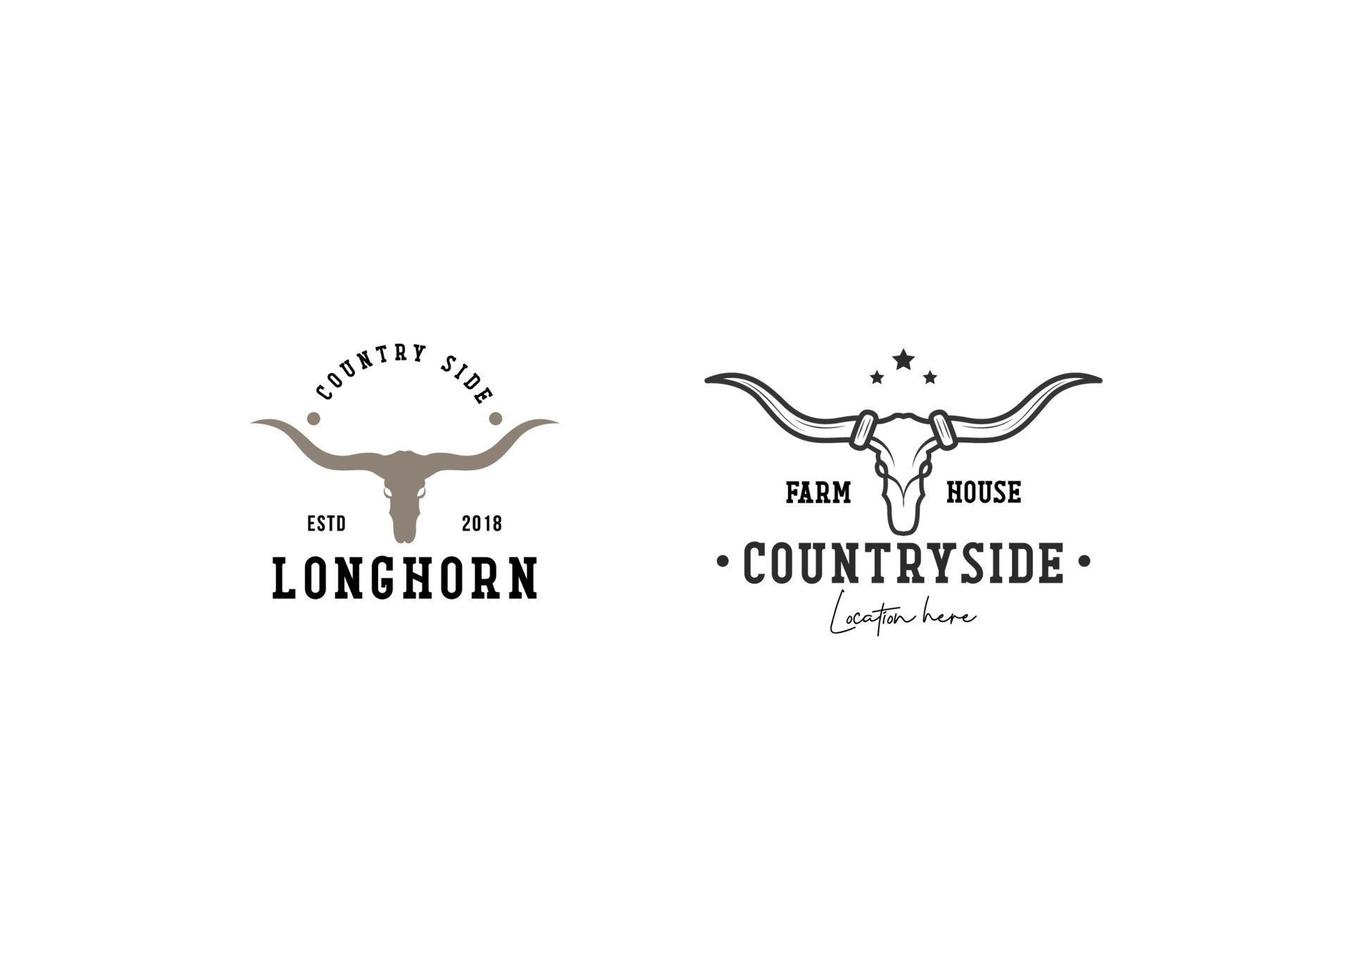 Texas Longhorn Cow, Country Western Bull Cattle Vintage Label Logo Design for Family Countryside Farm vector